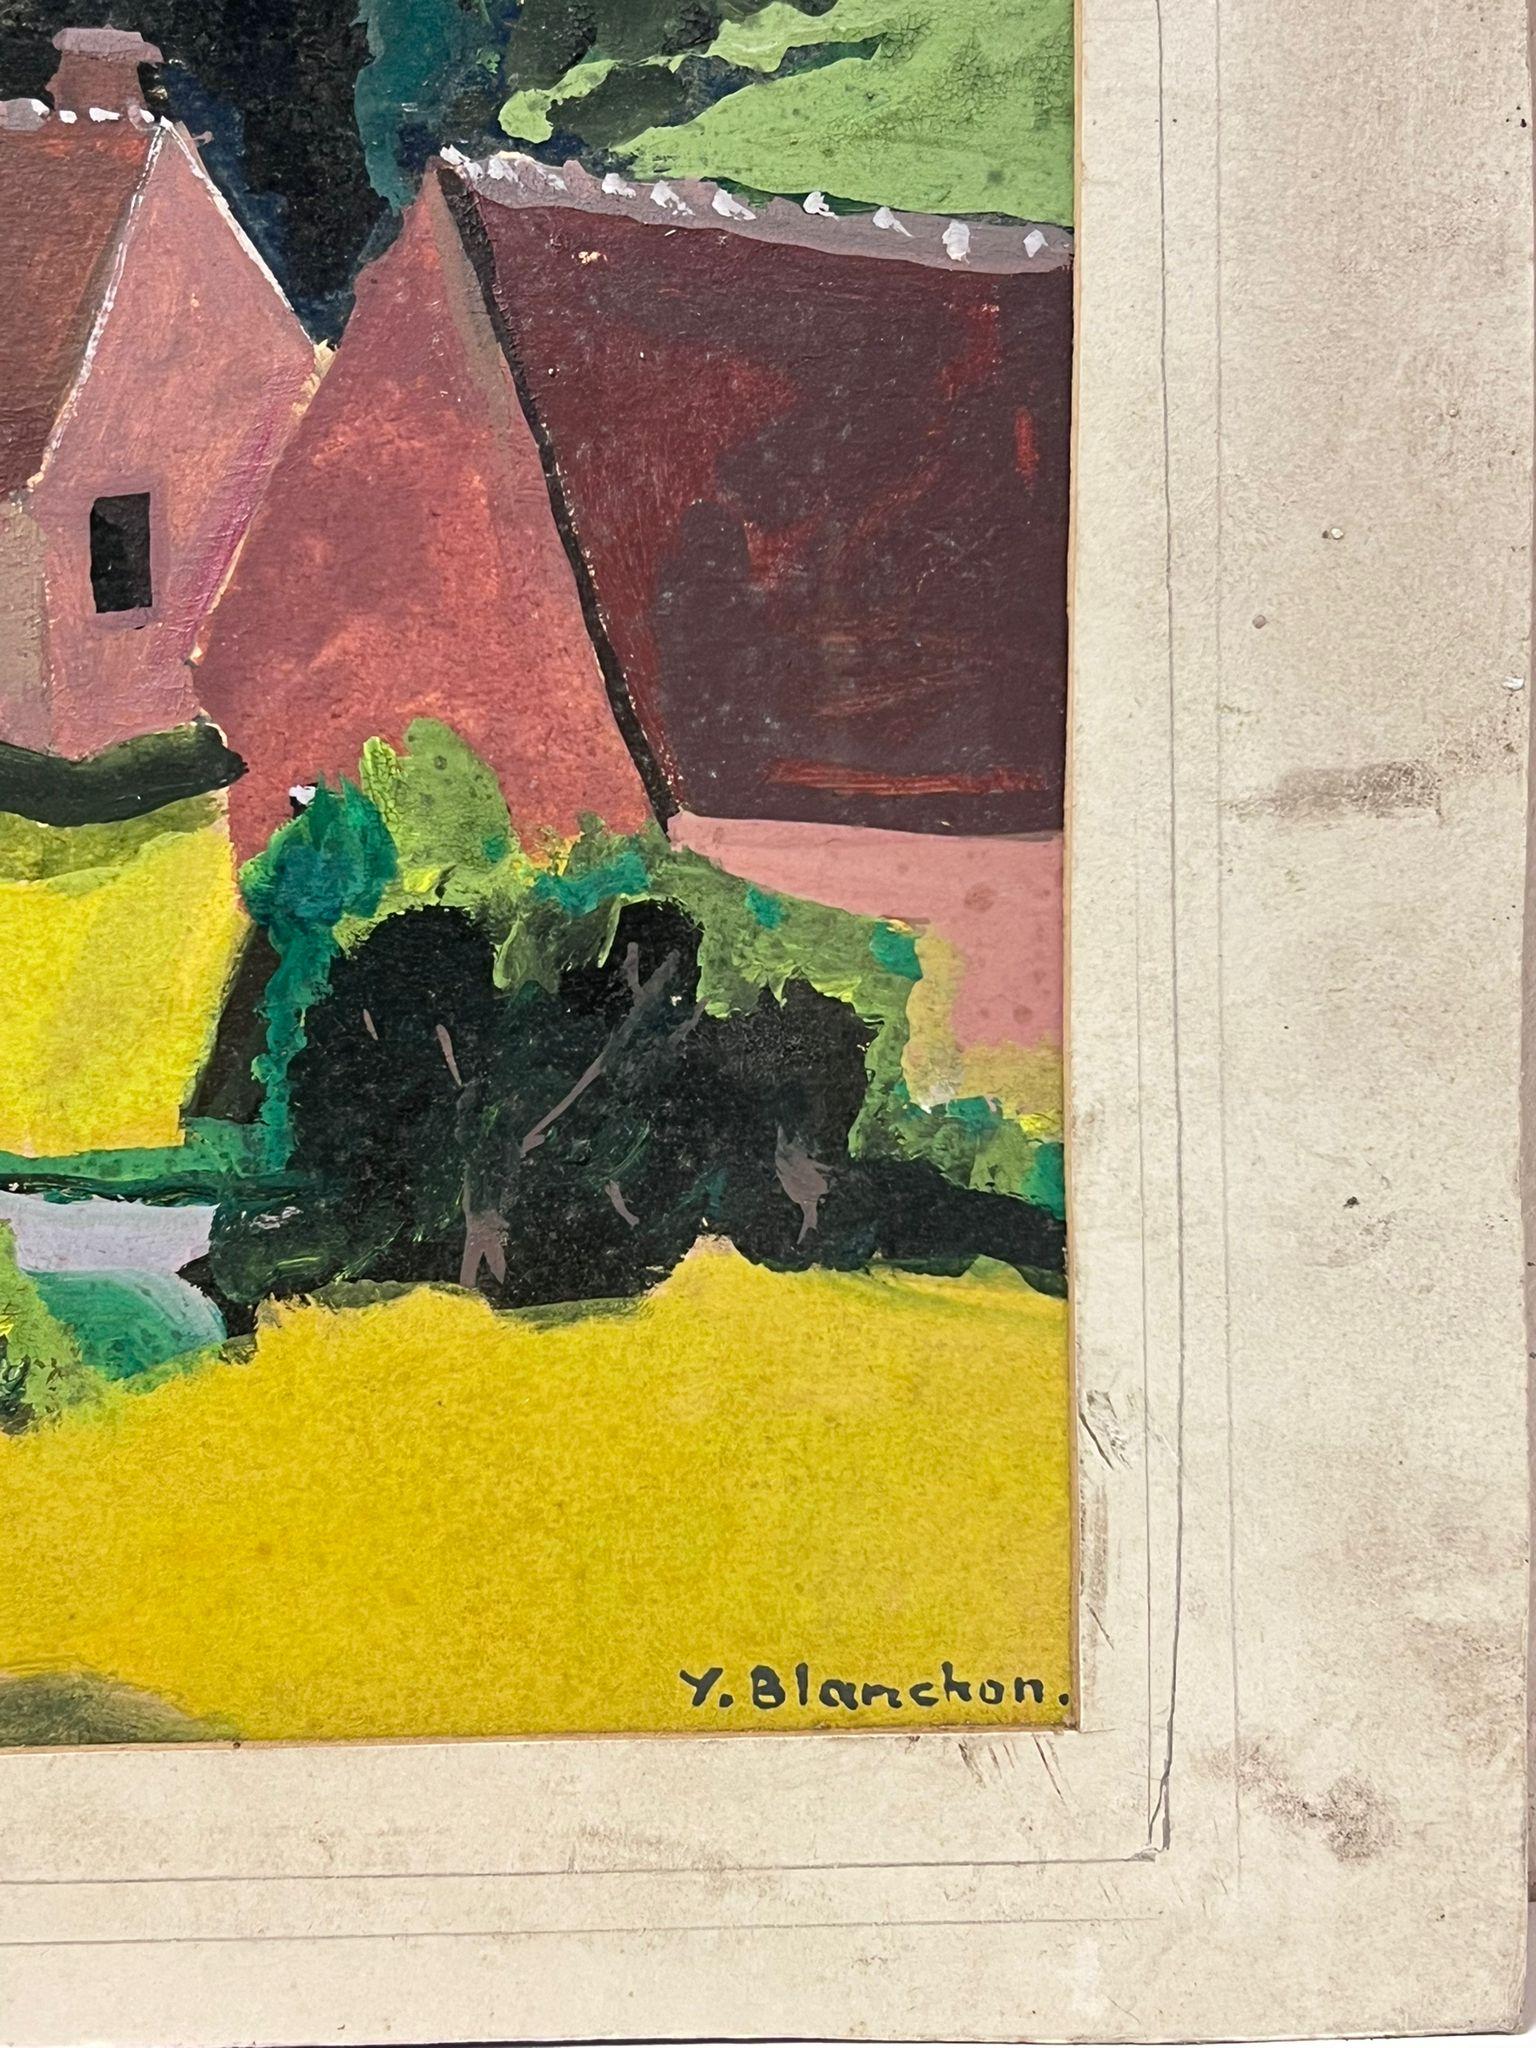 French Landscape
signed by Y. Blanchon, French 1950's Impressionist 
gouache on artist paper, mounted in a card frame
mounted: 11.5 x 14.5 inches
painting: 9 x 11 inches
provenance: from a large private collection of this artists work in Northern